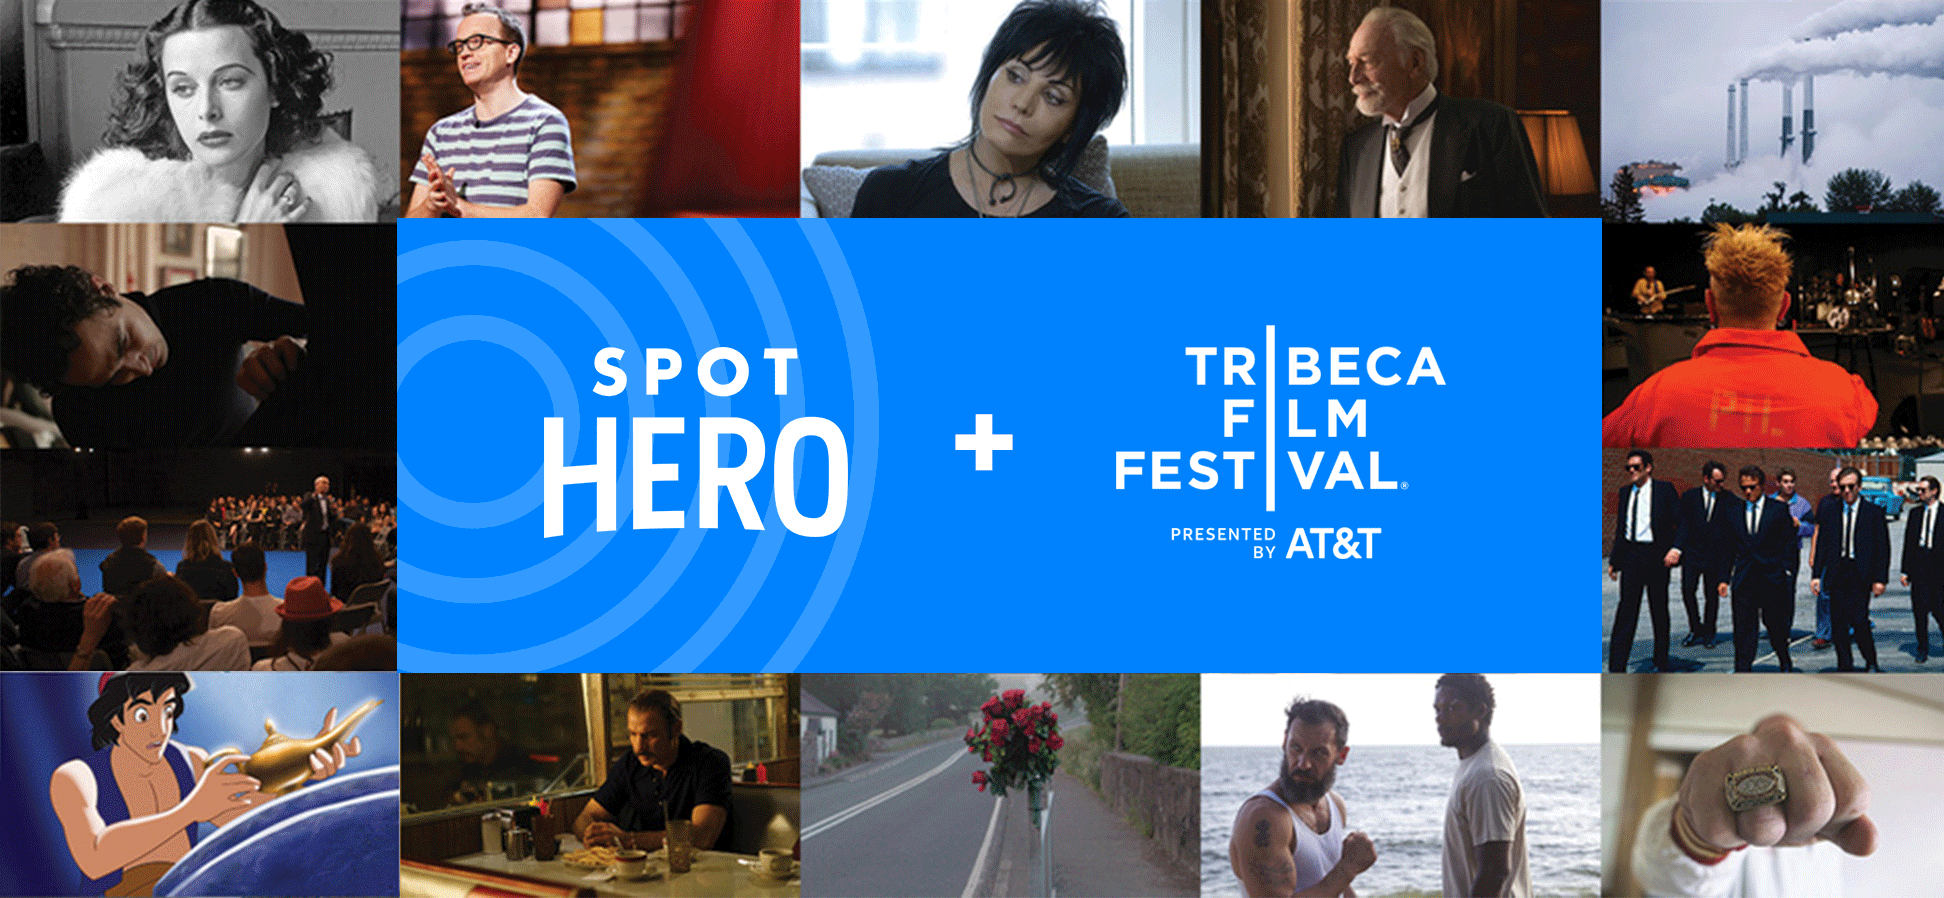 Your Guide to the 2018 Tribeca Film Festival: Parking, Tickets & More